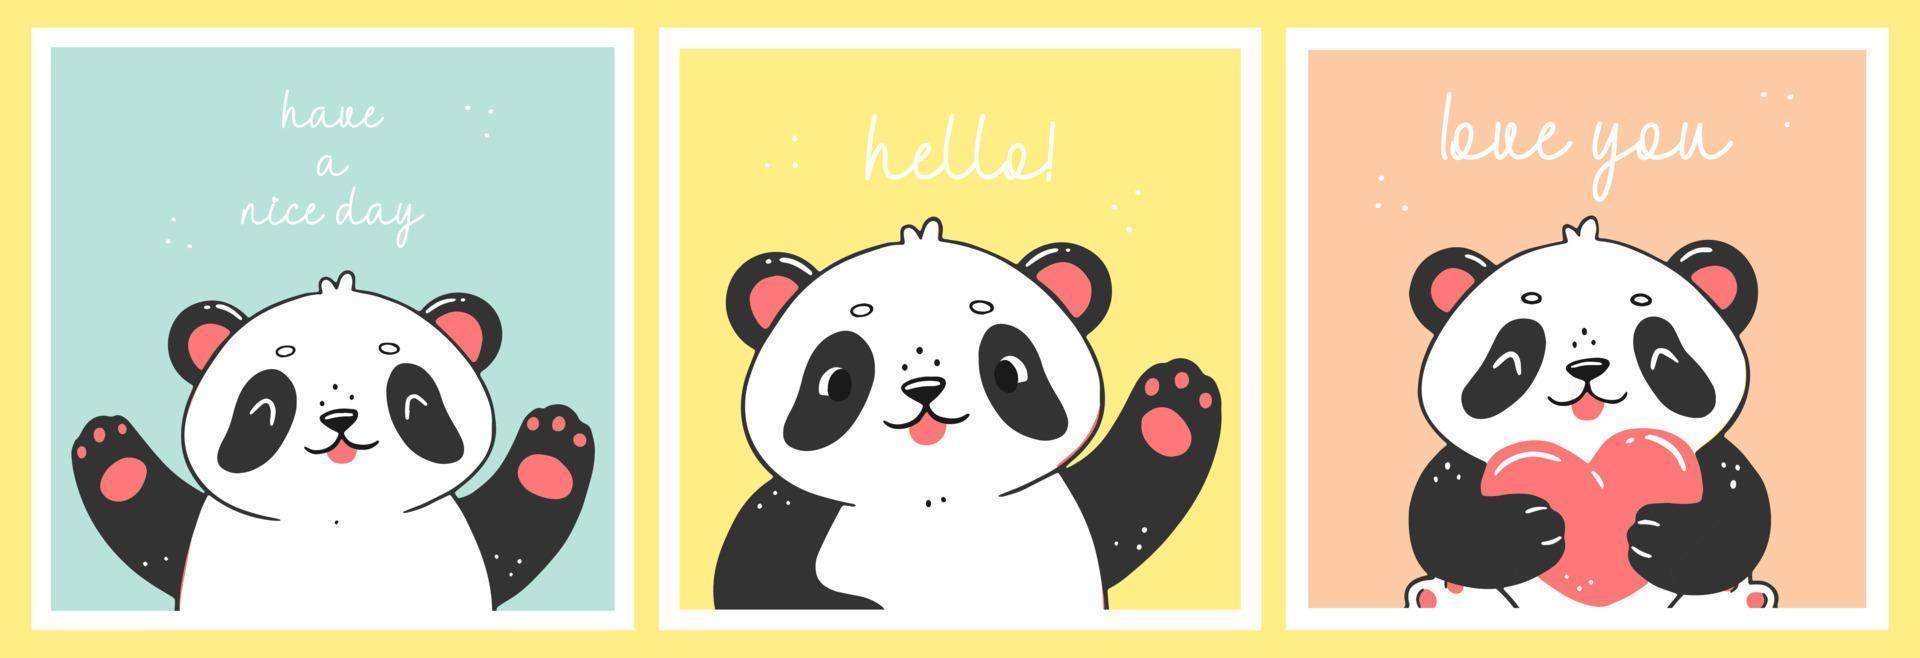 A set of three colorful children's postcards with cute panda and inscriptions. Love you, hello, have a nice day. The concept of cards for children. Vector animal illustration.